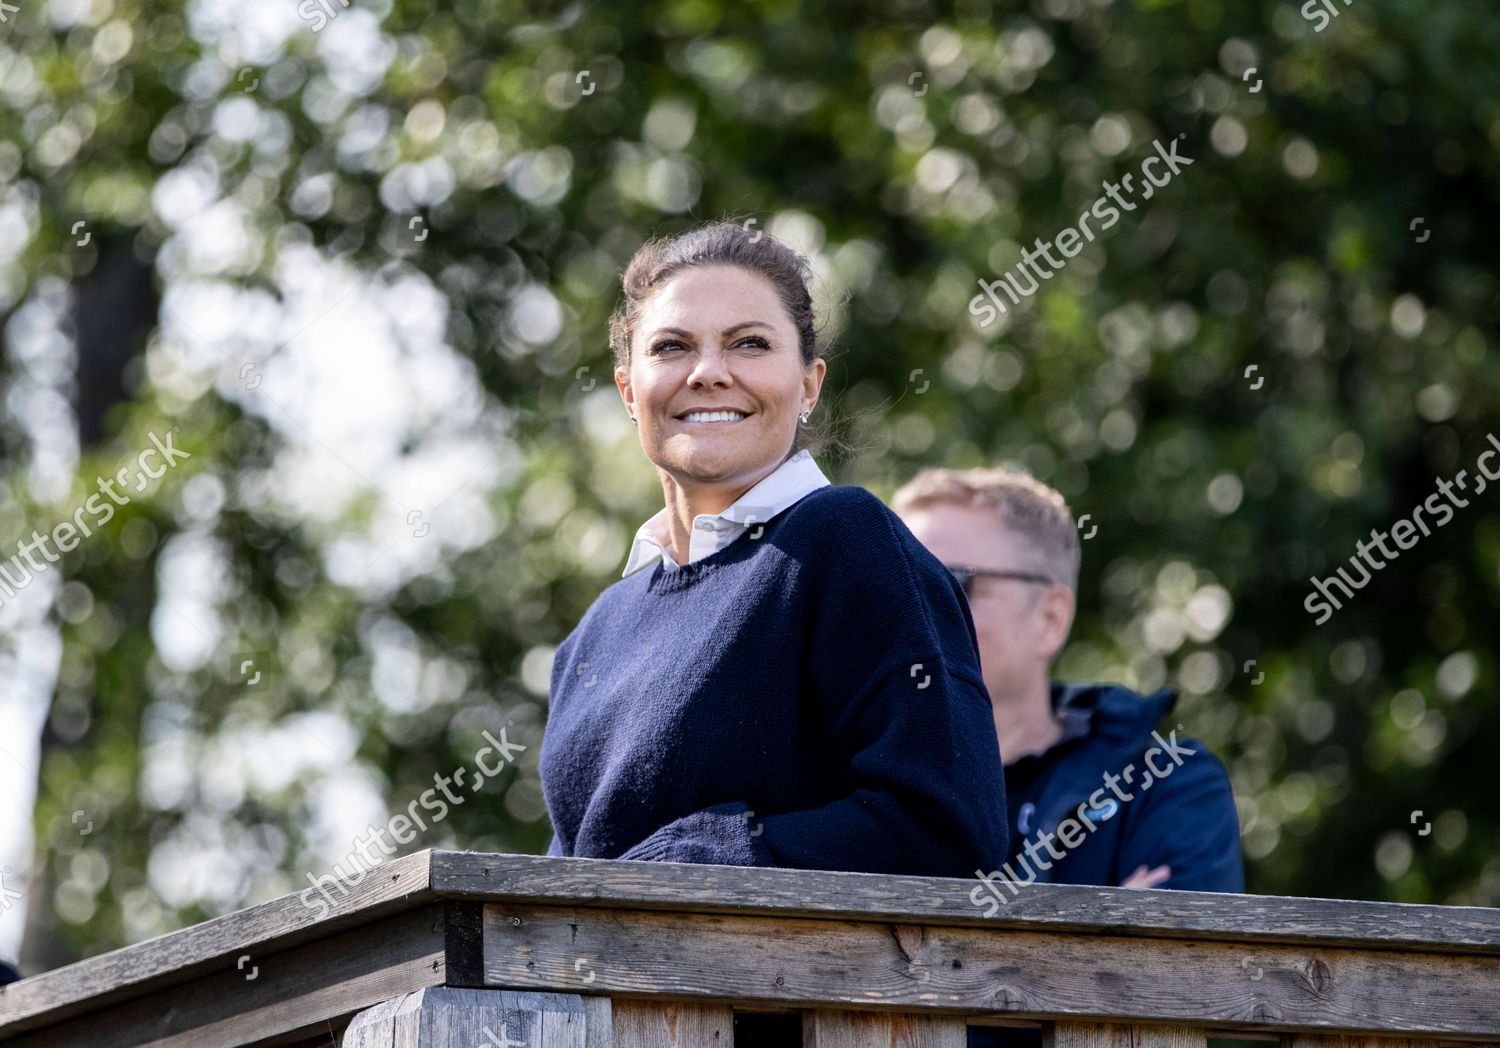 crown-princess-victoria-and-her-dog-rio-visit-alo-and-uto-sweden-shutterstock-editorial-12361980ag.jpg